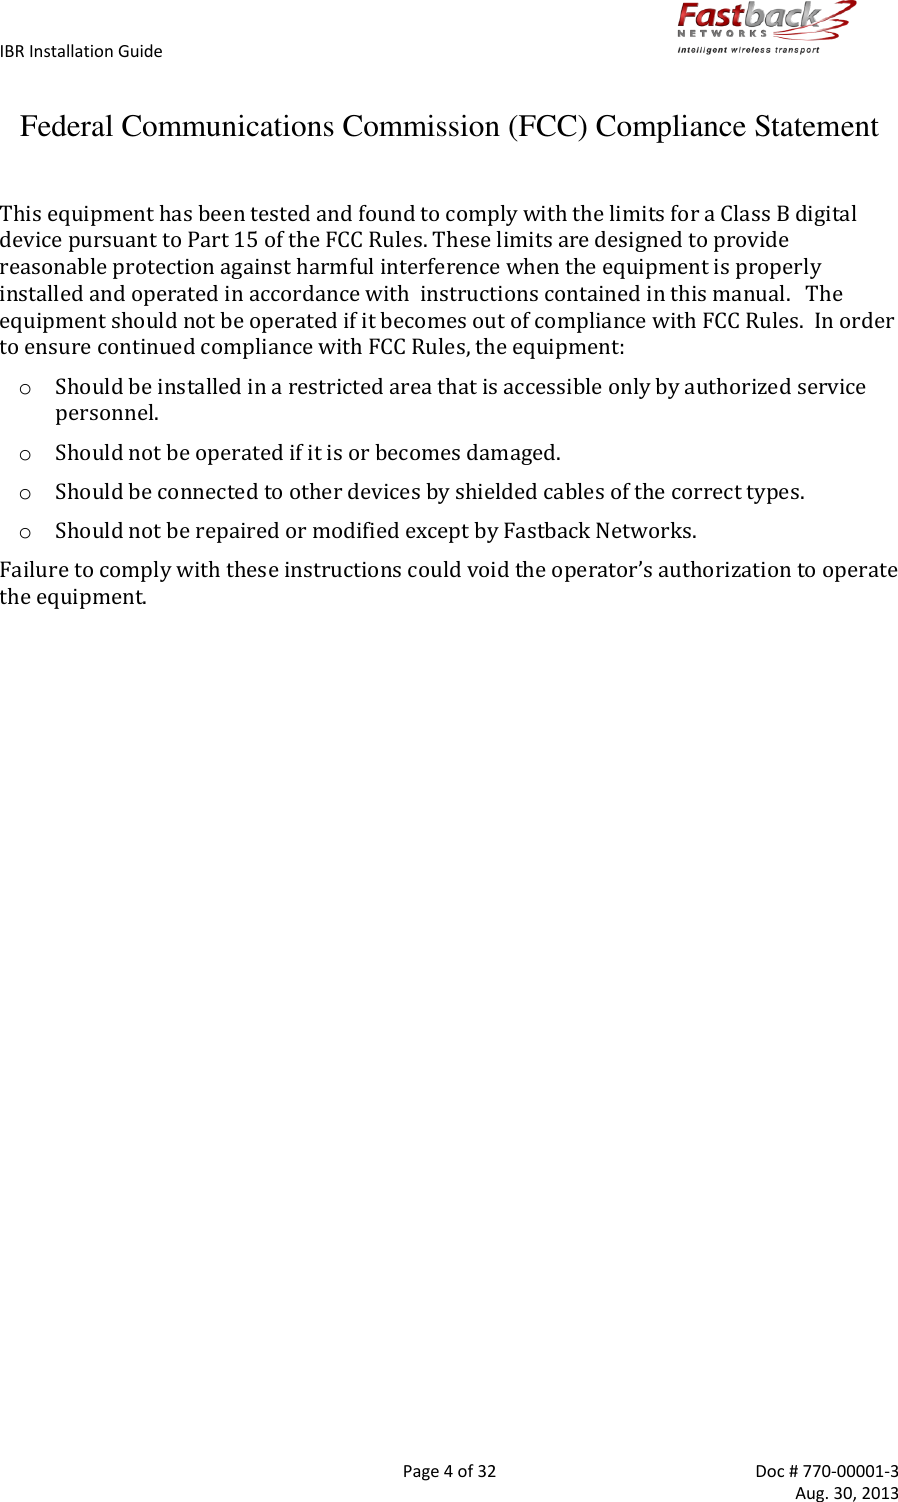 IBR Installation Guide        Page 4 of 32  Doc # 770-00001-3     Aug. 30, 2013   Federal Communications Commission (FCC) Compliance Statement  This equipment has been tested and found to comply with the limits for a Class B digital device pursuant to Part 15 of the FCC Rules. These limits are designed to provide reasonable protection against harmful interference when the equipment is properly installed and operated in accordance with  instructions contained in this manual.   The equipment should not be operated if it becomes out of compliance with FCC Rules.  In order to ensure continued compliance with FCC Rules, the equipment: o Should be installed in a restricted area that is accessible only by authorized service personnel. o Should not be operated if it is or becomes damaged. o Should be connected to other devices by shielded cables of the correct types. o Should not be repaired or modified except by Fastback Networks. Failure to comply with these instructions could void the operator’s authorization to operate the equipment.